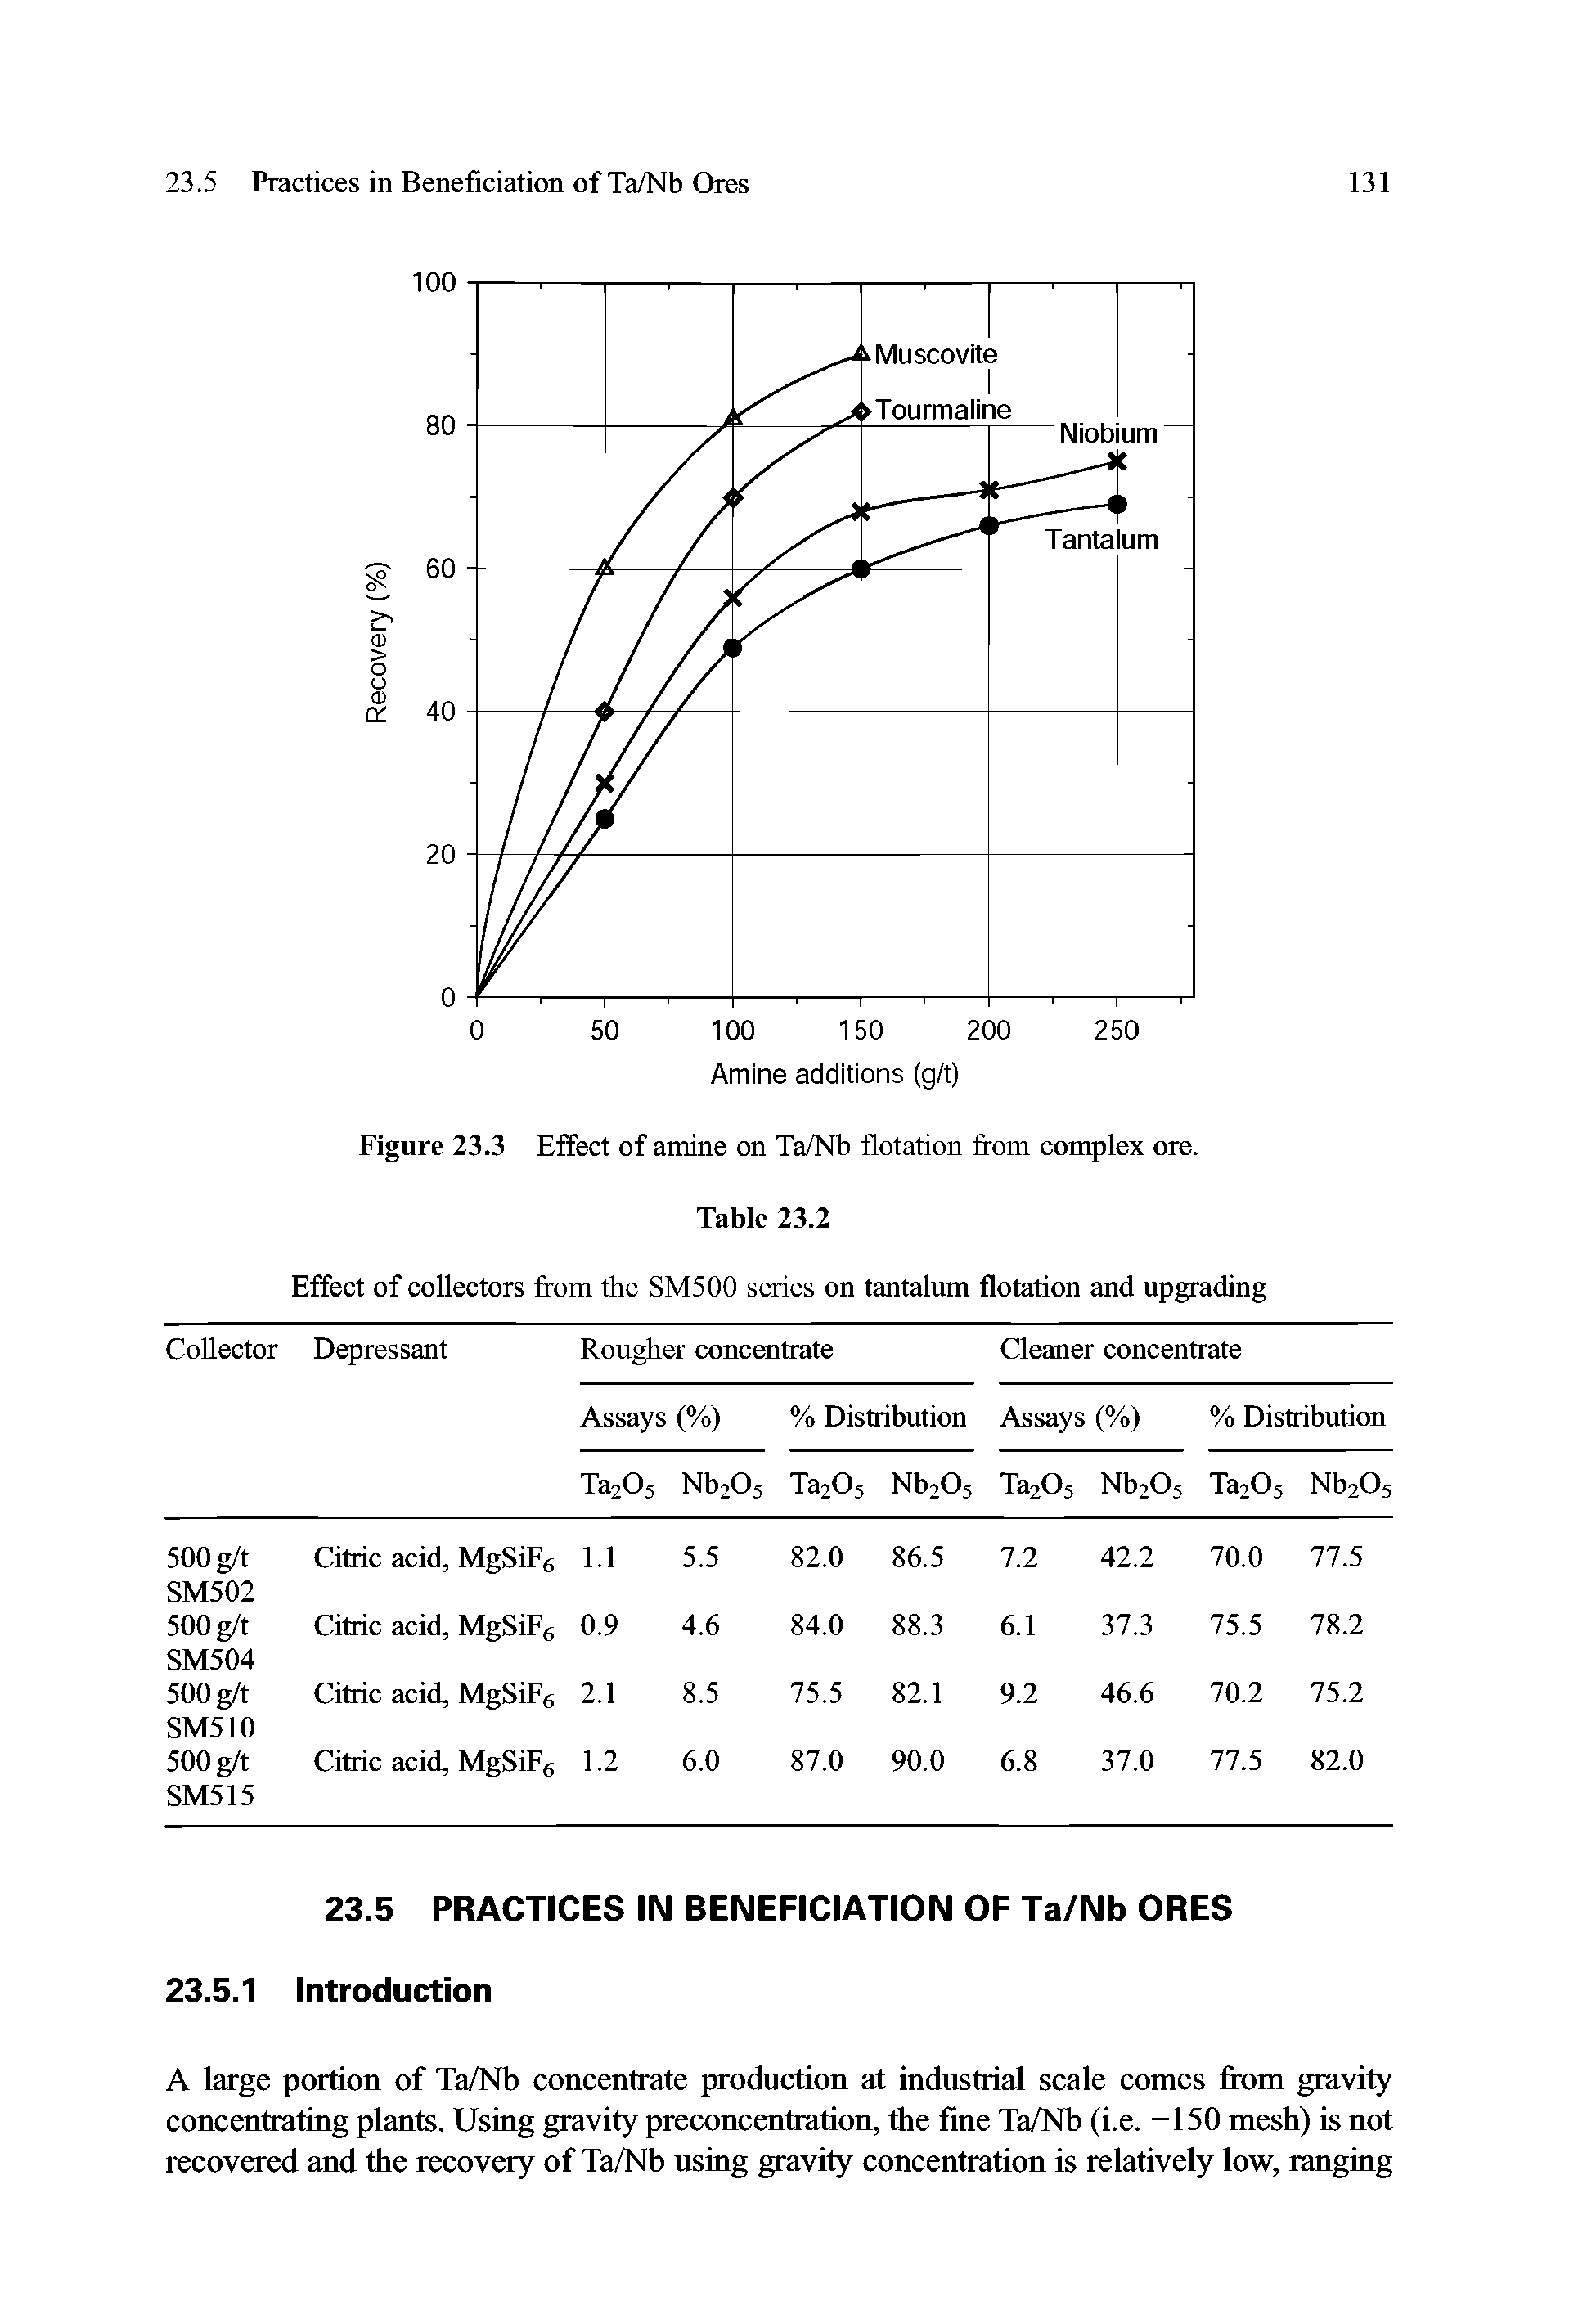 Figure 23.3 Effect of amine on Ta/Nb flotation from complex ore.